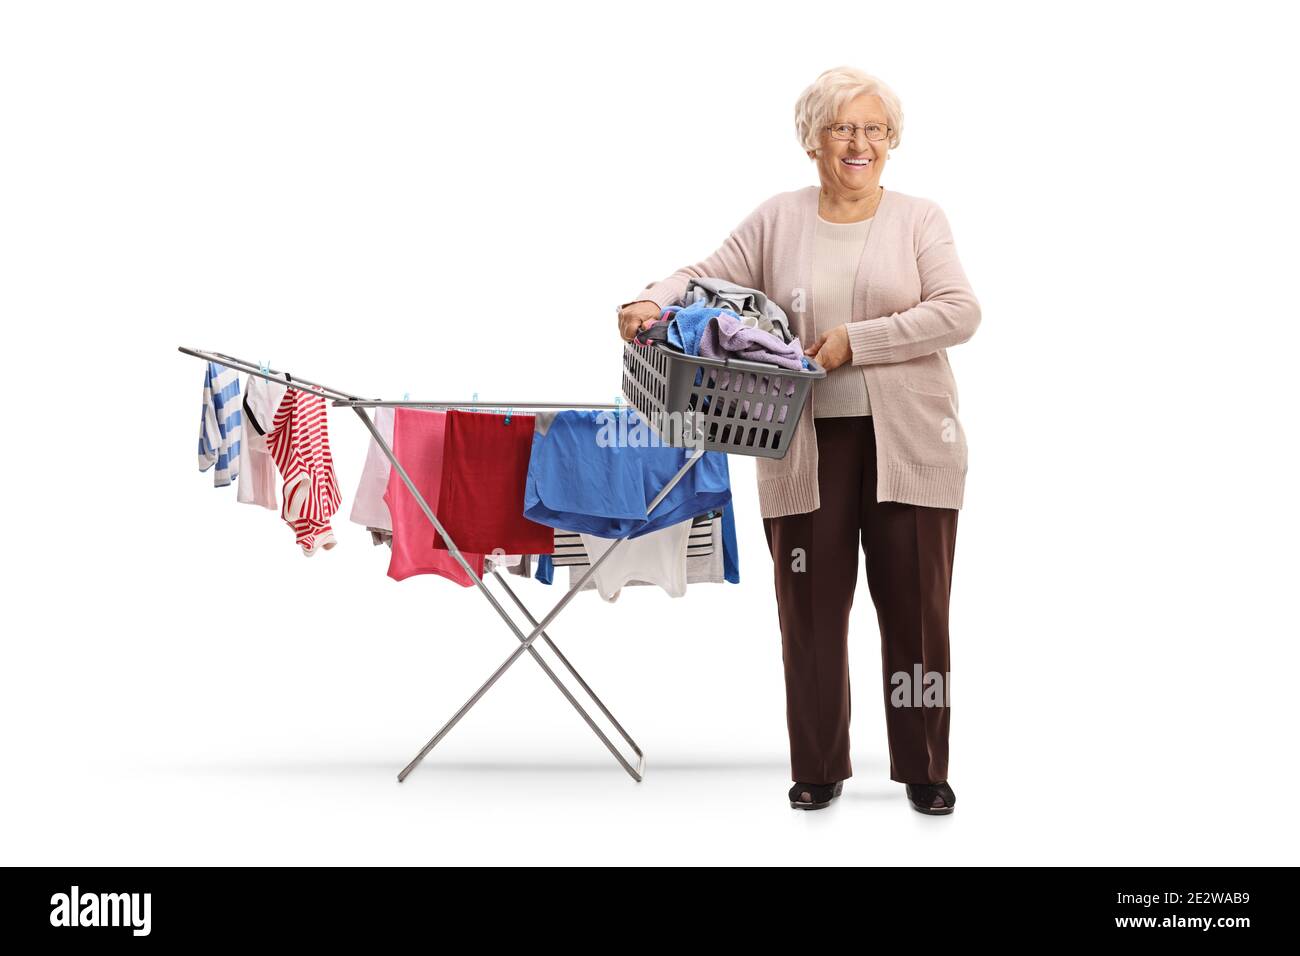 Elderly woman holding a laundry basket with clothes next to a clothing line rack isolated on white background Stock Photo